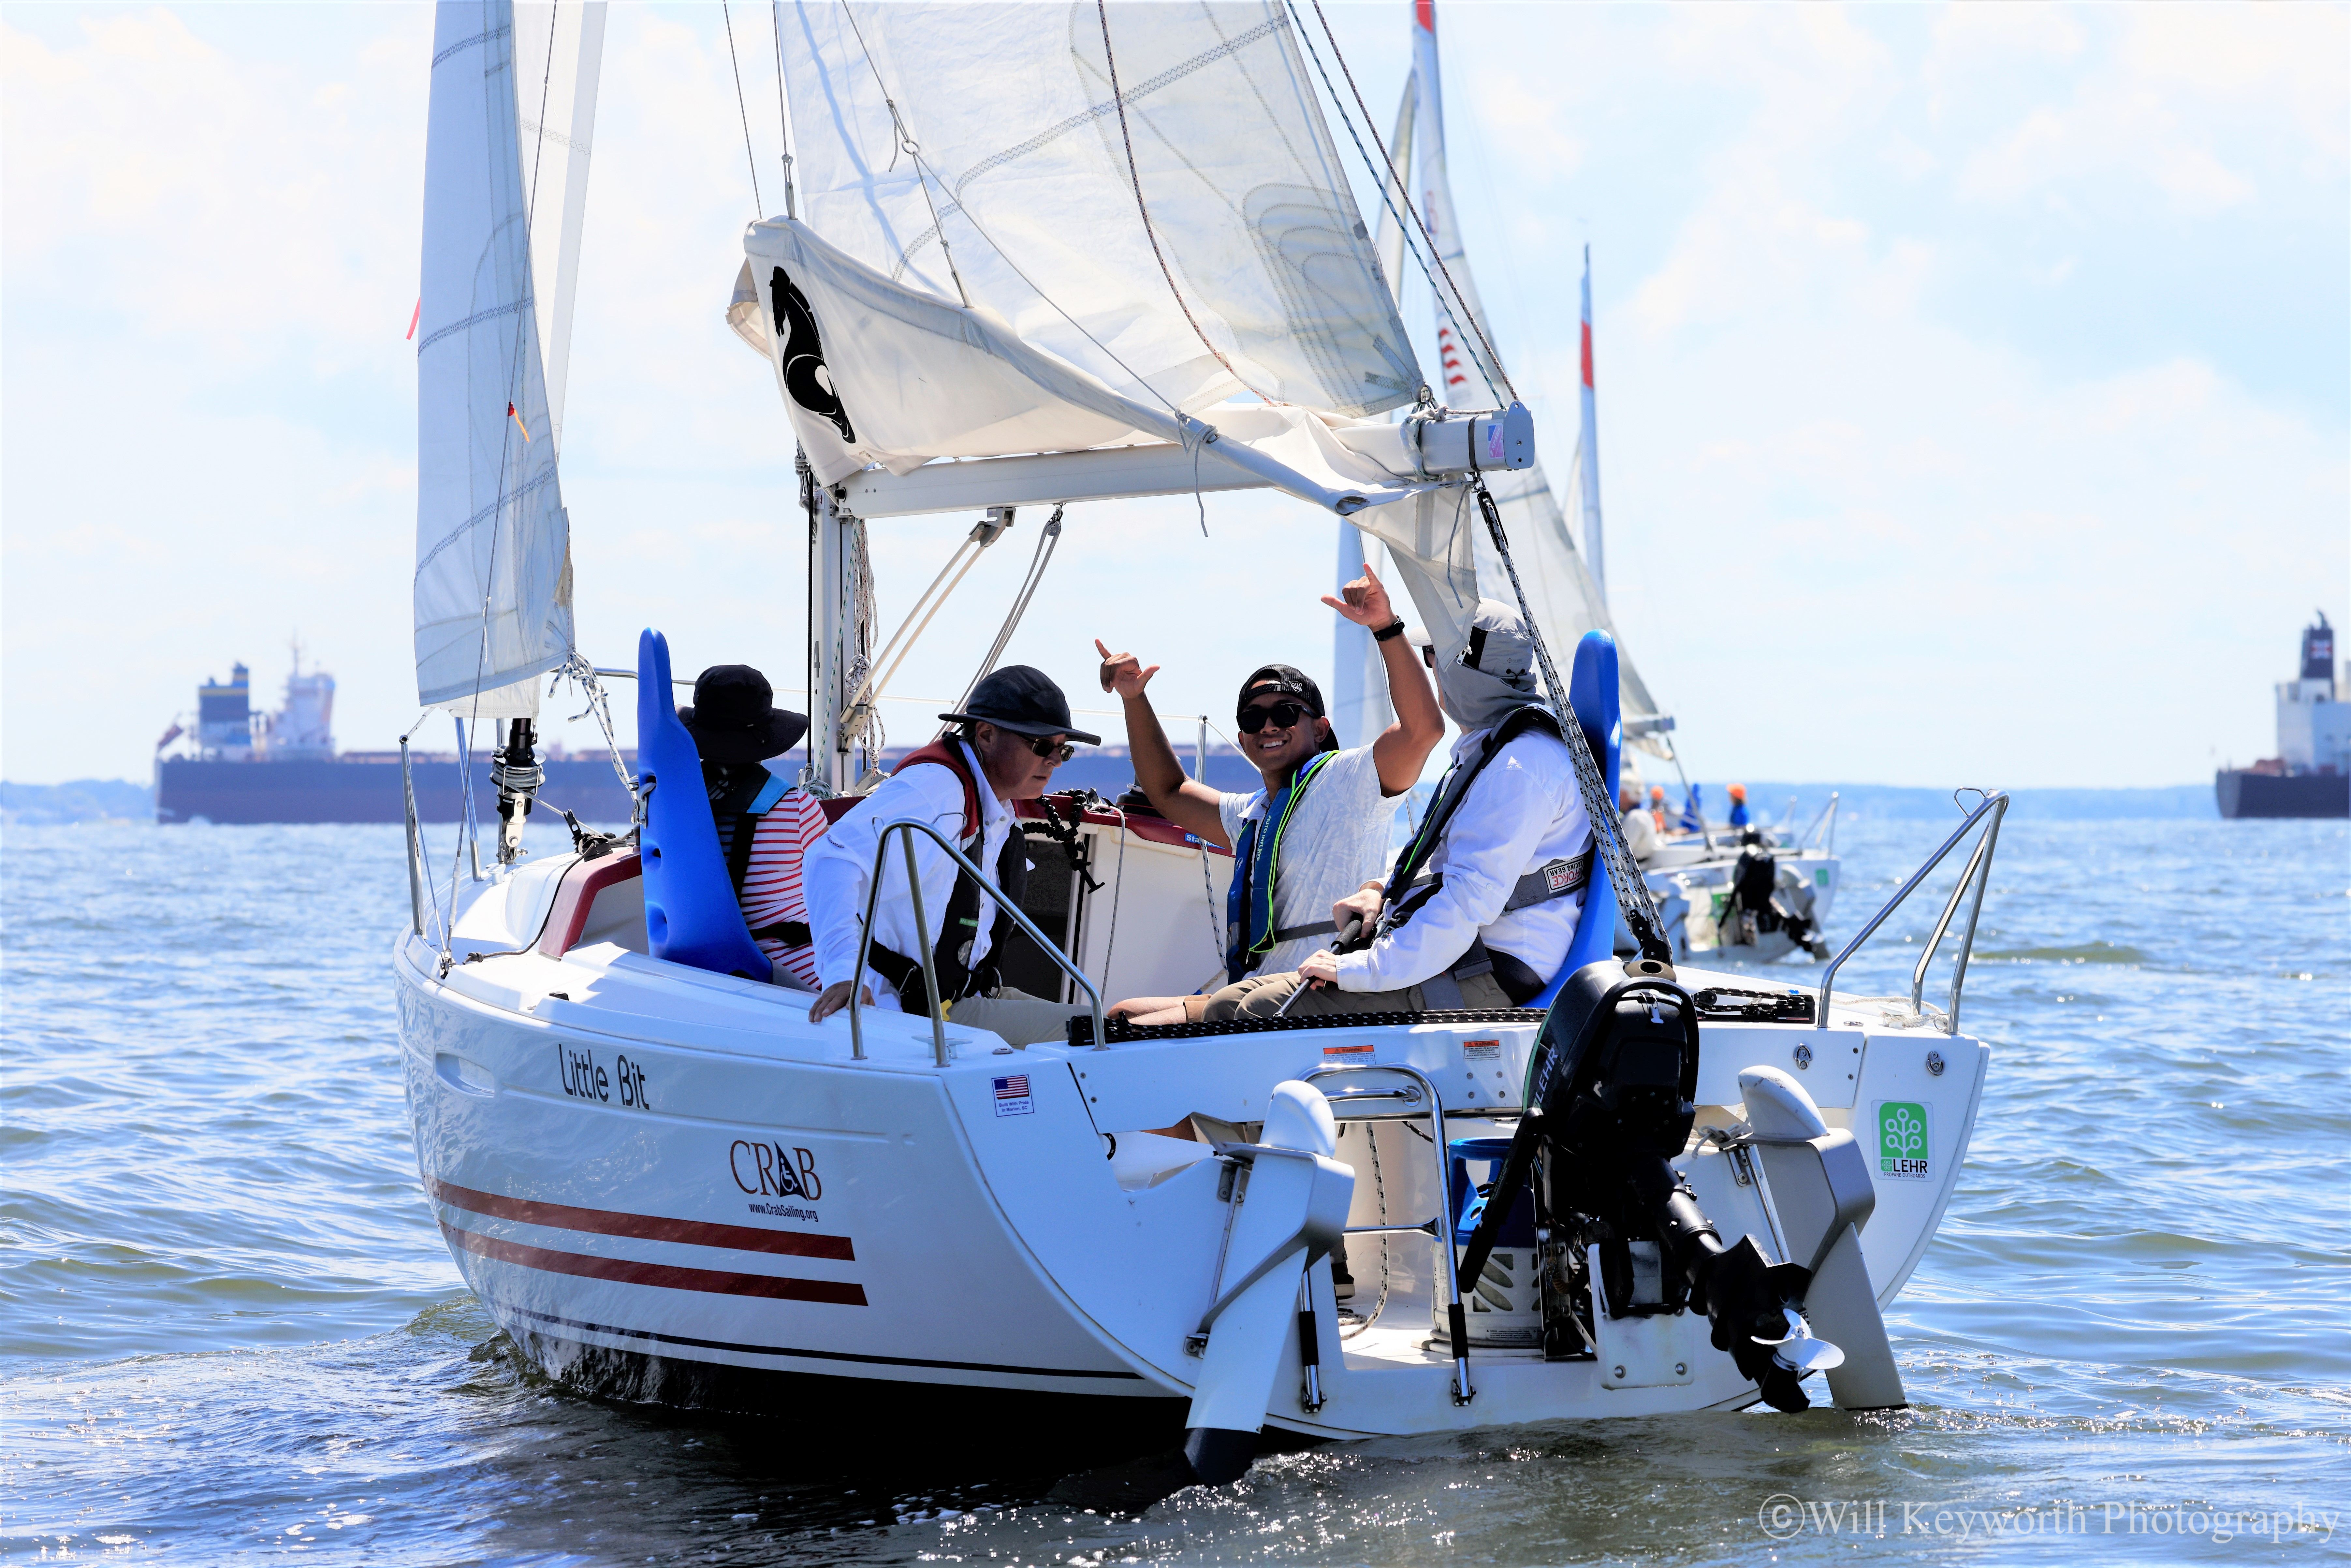 Photo of one of the CRAB sailboats and participants on the water during the regatta. 